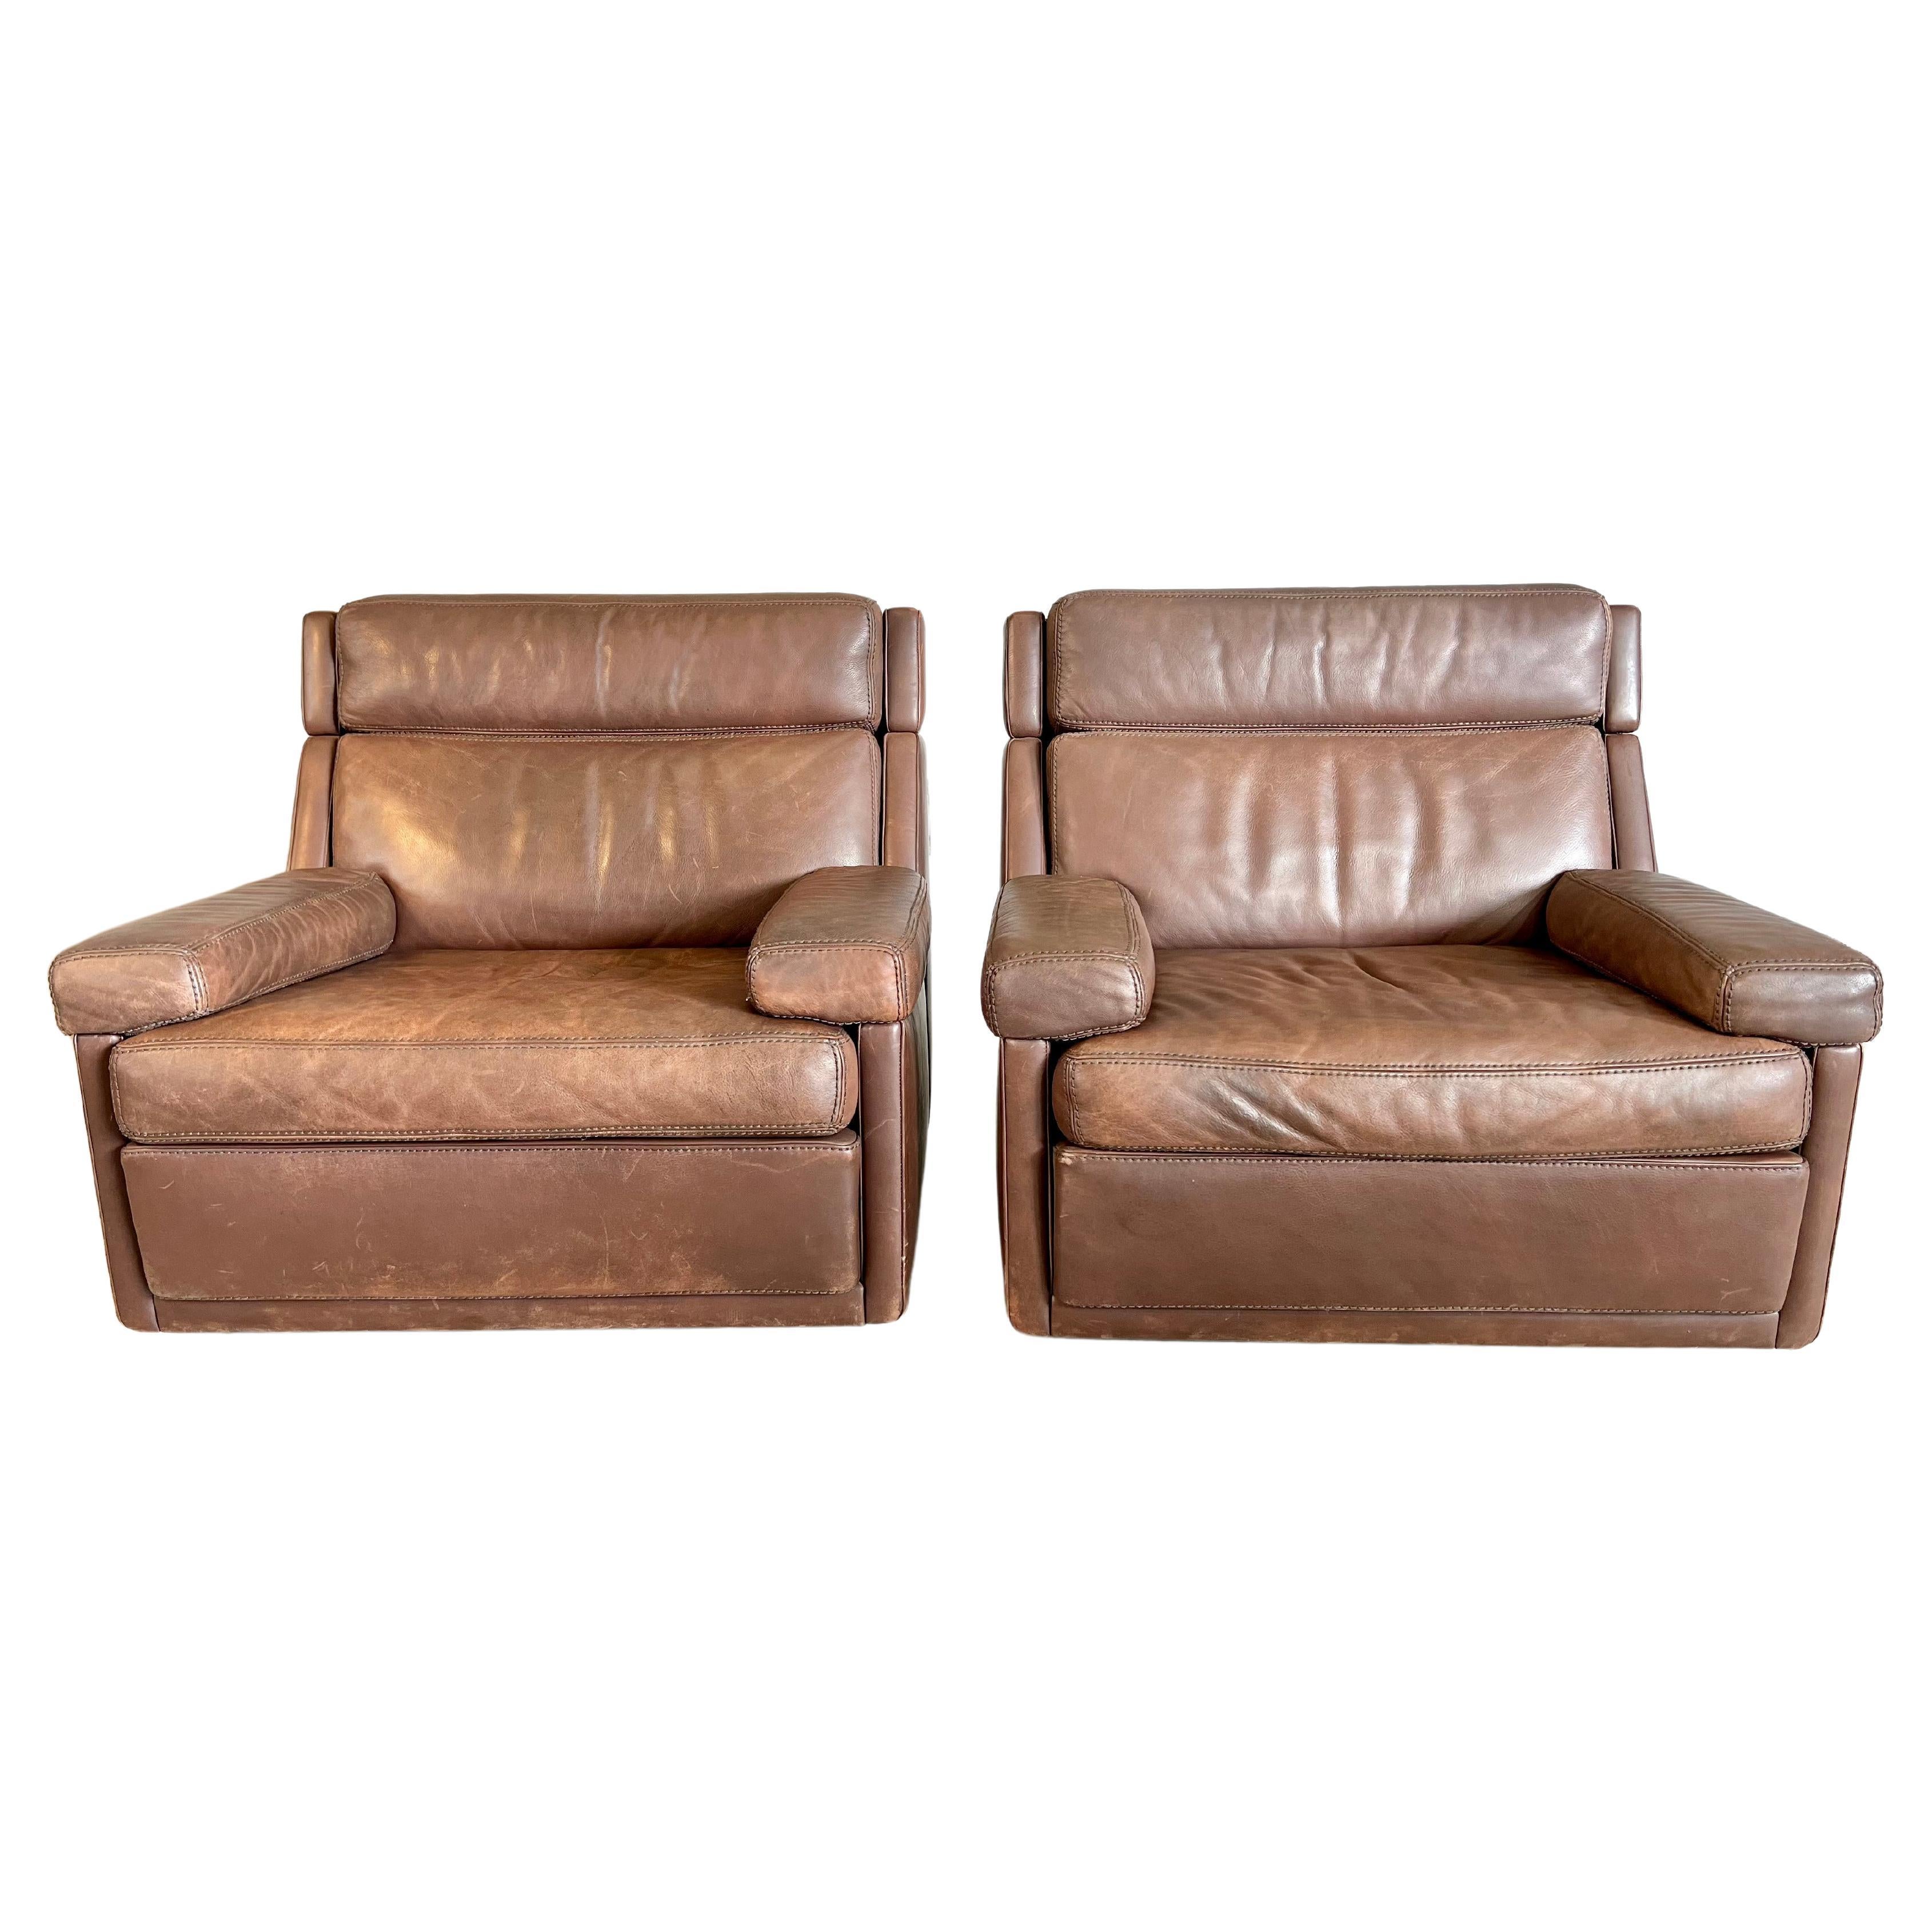 Original Vintage Modern Leather Armchairs by Durlet, Belgium, 1970s - a Pair